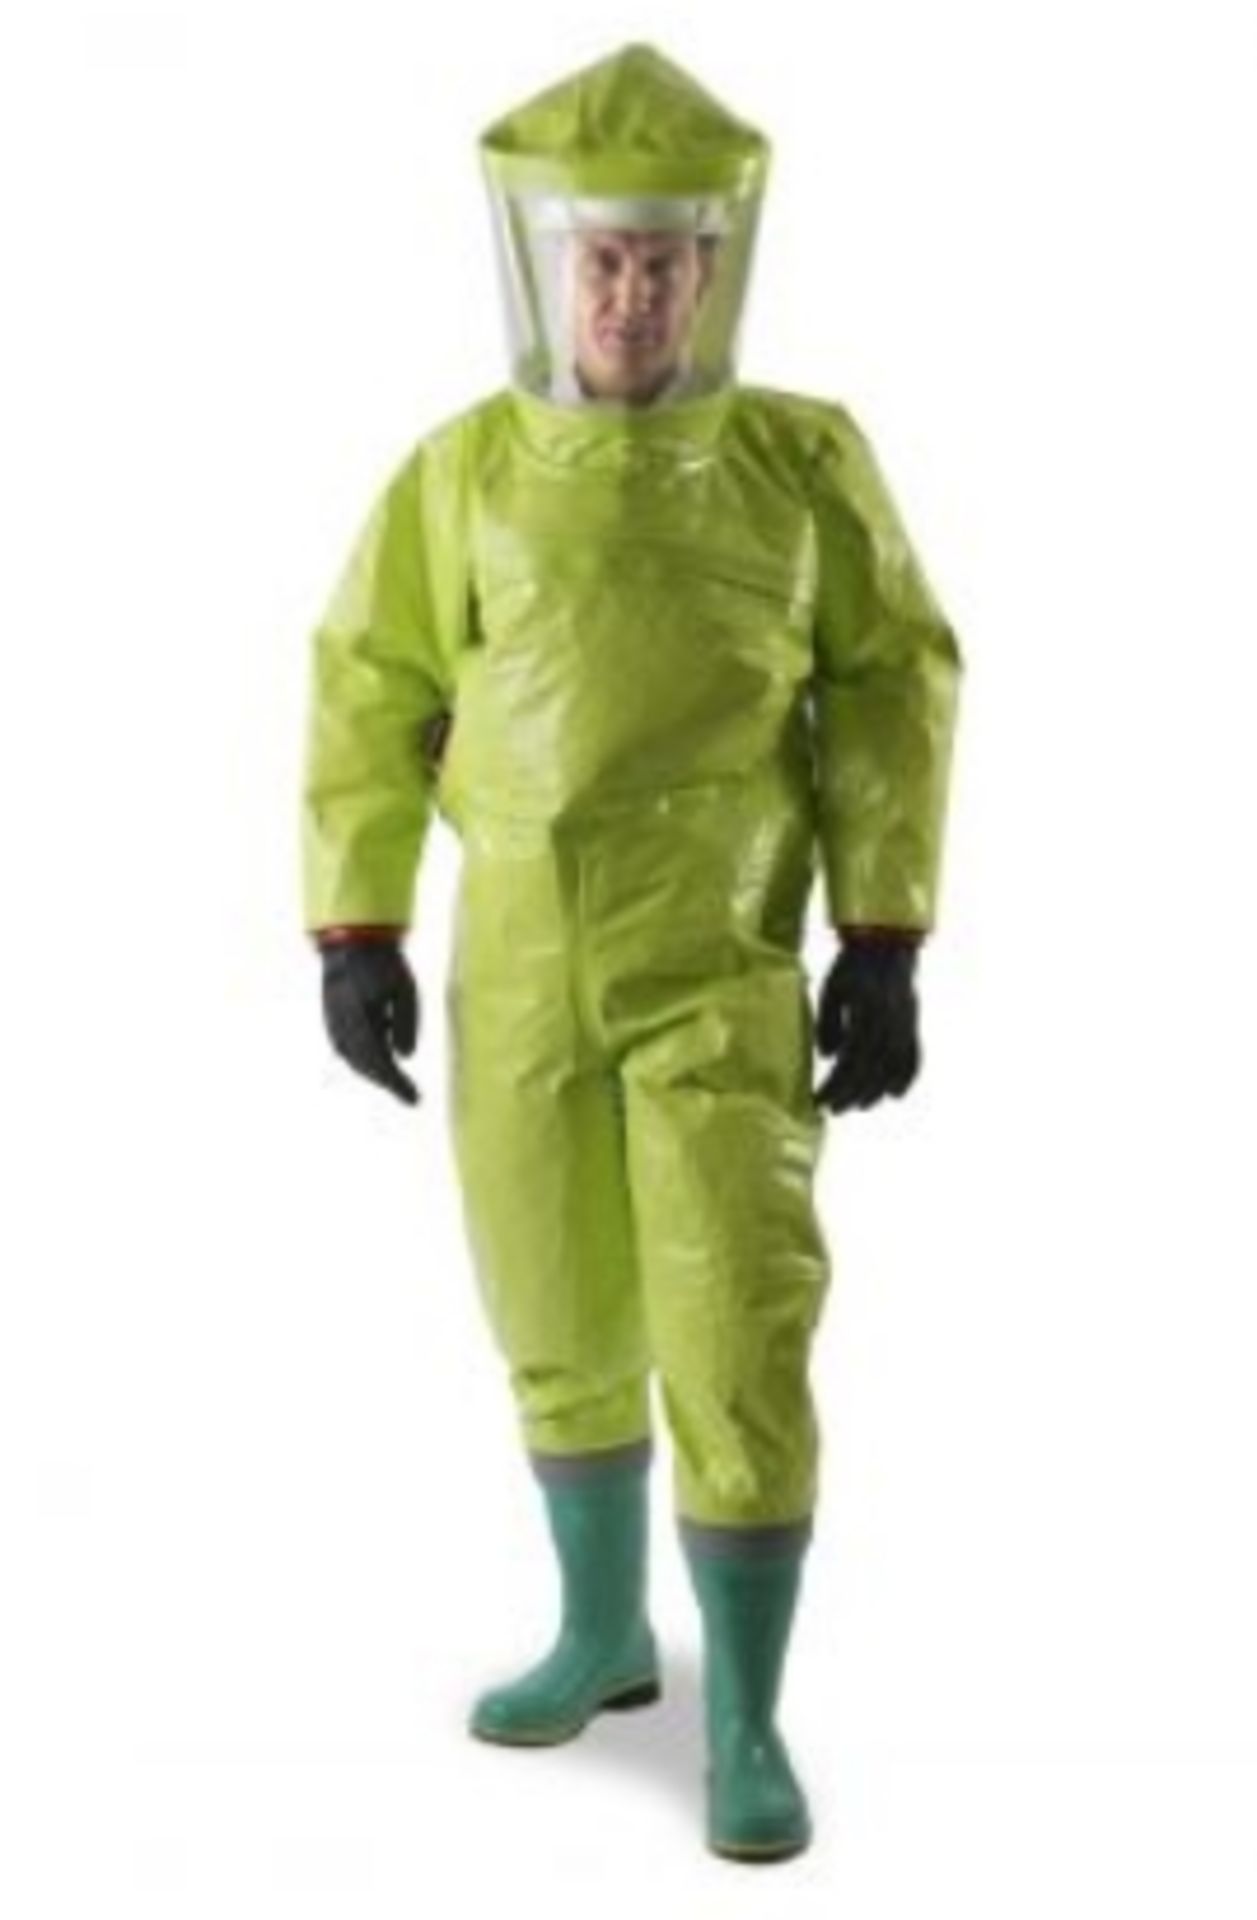 Respirex Powered Decontamination Suit with Attached Boots and Gloves, Helmet, Filters, Battery etc